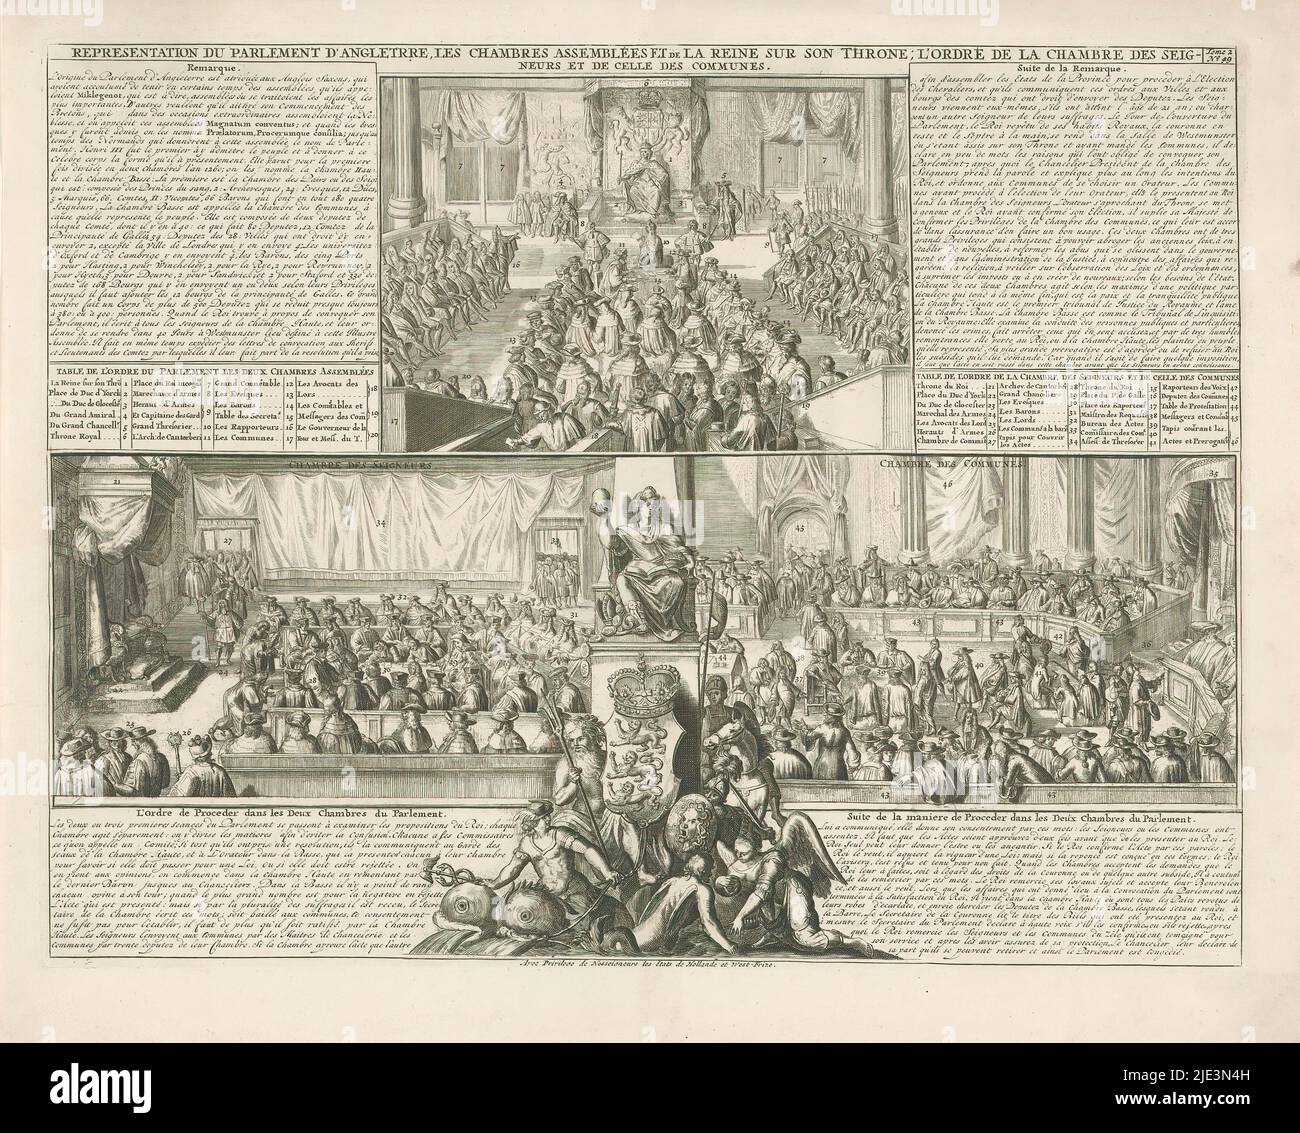 Session of the English Parliament, 1708, Representation du parlement d'Angletrre, les chambres assemblées et da la reine sur son throne (...) (title on object), Sheet on the customs of the English Parliament,1708. Above a representation of a joint session of the House of Lords and the House of Commons, presided over by the Queen. Below left a session of the House of Lords, right the House of Commons. With legends and explanations in French. Marked at top right: Tome 2 No. 49. From Chatelain's Atlas Historique., print maker: anonymous, Staten van Holland en West-Friesland, (mentioned on object Stock Photo